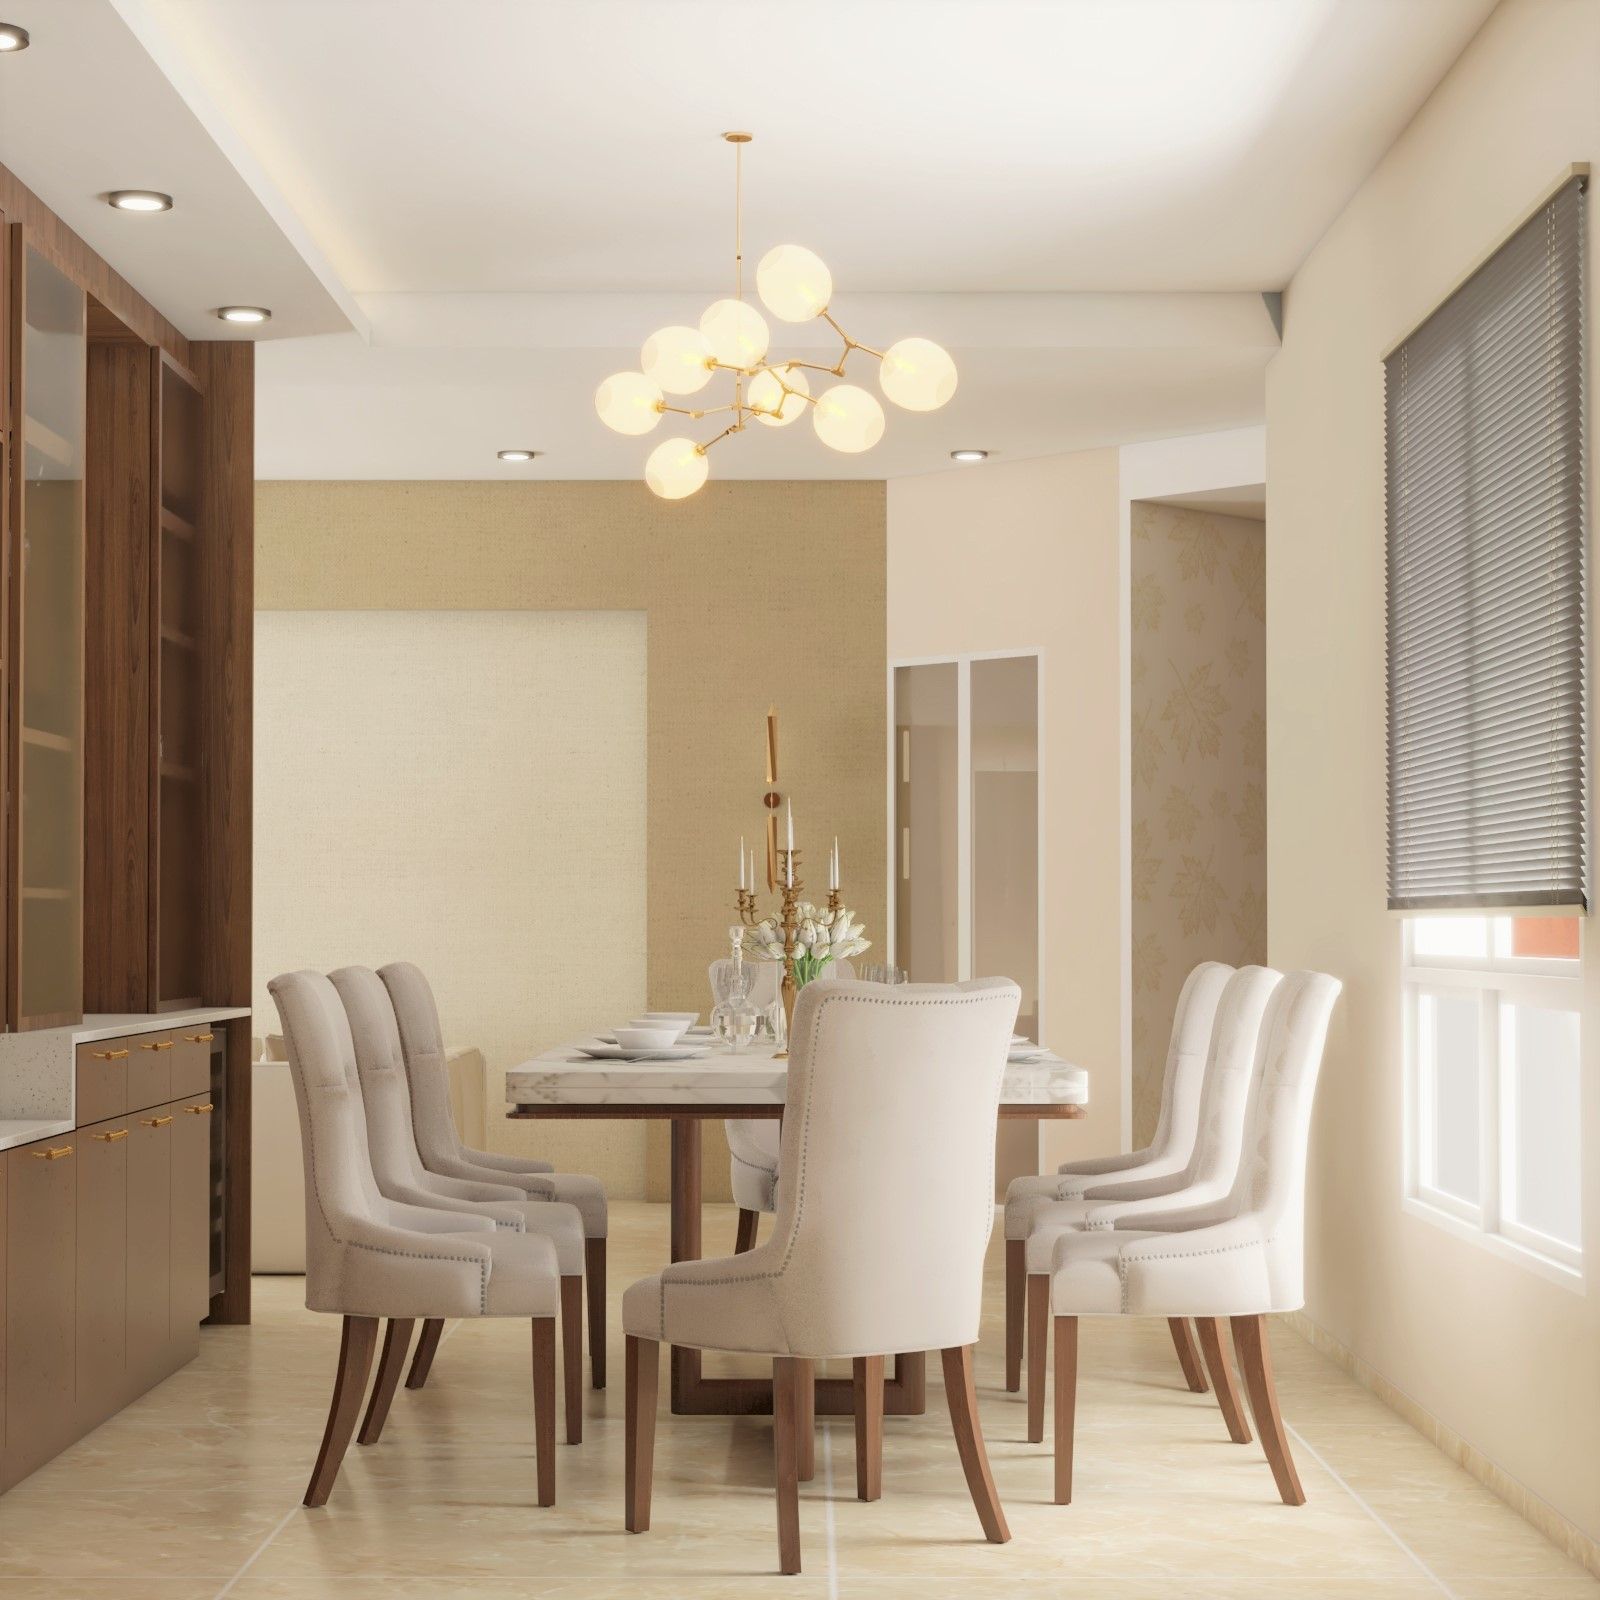 Contemporary 8-Seater Dining Room Design With Open Storage